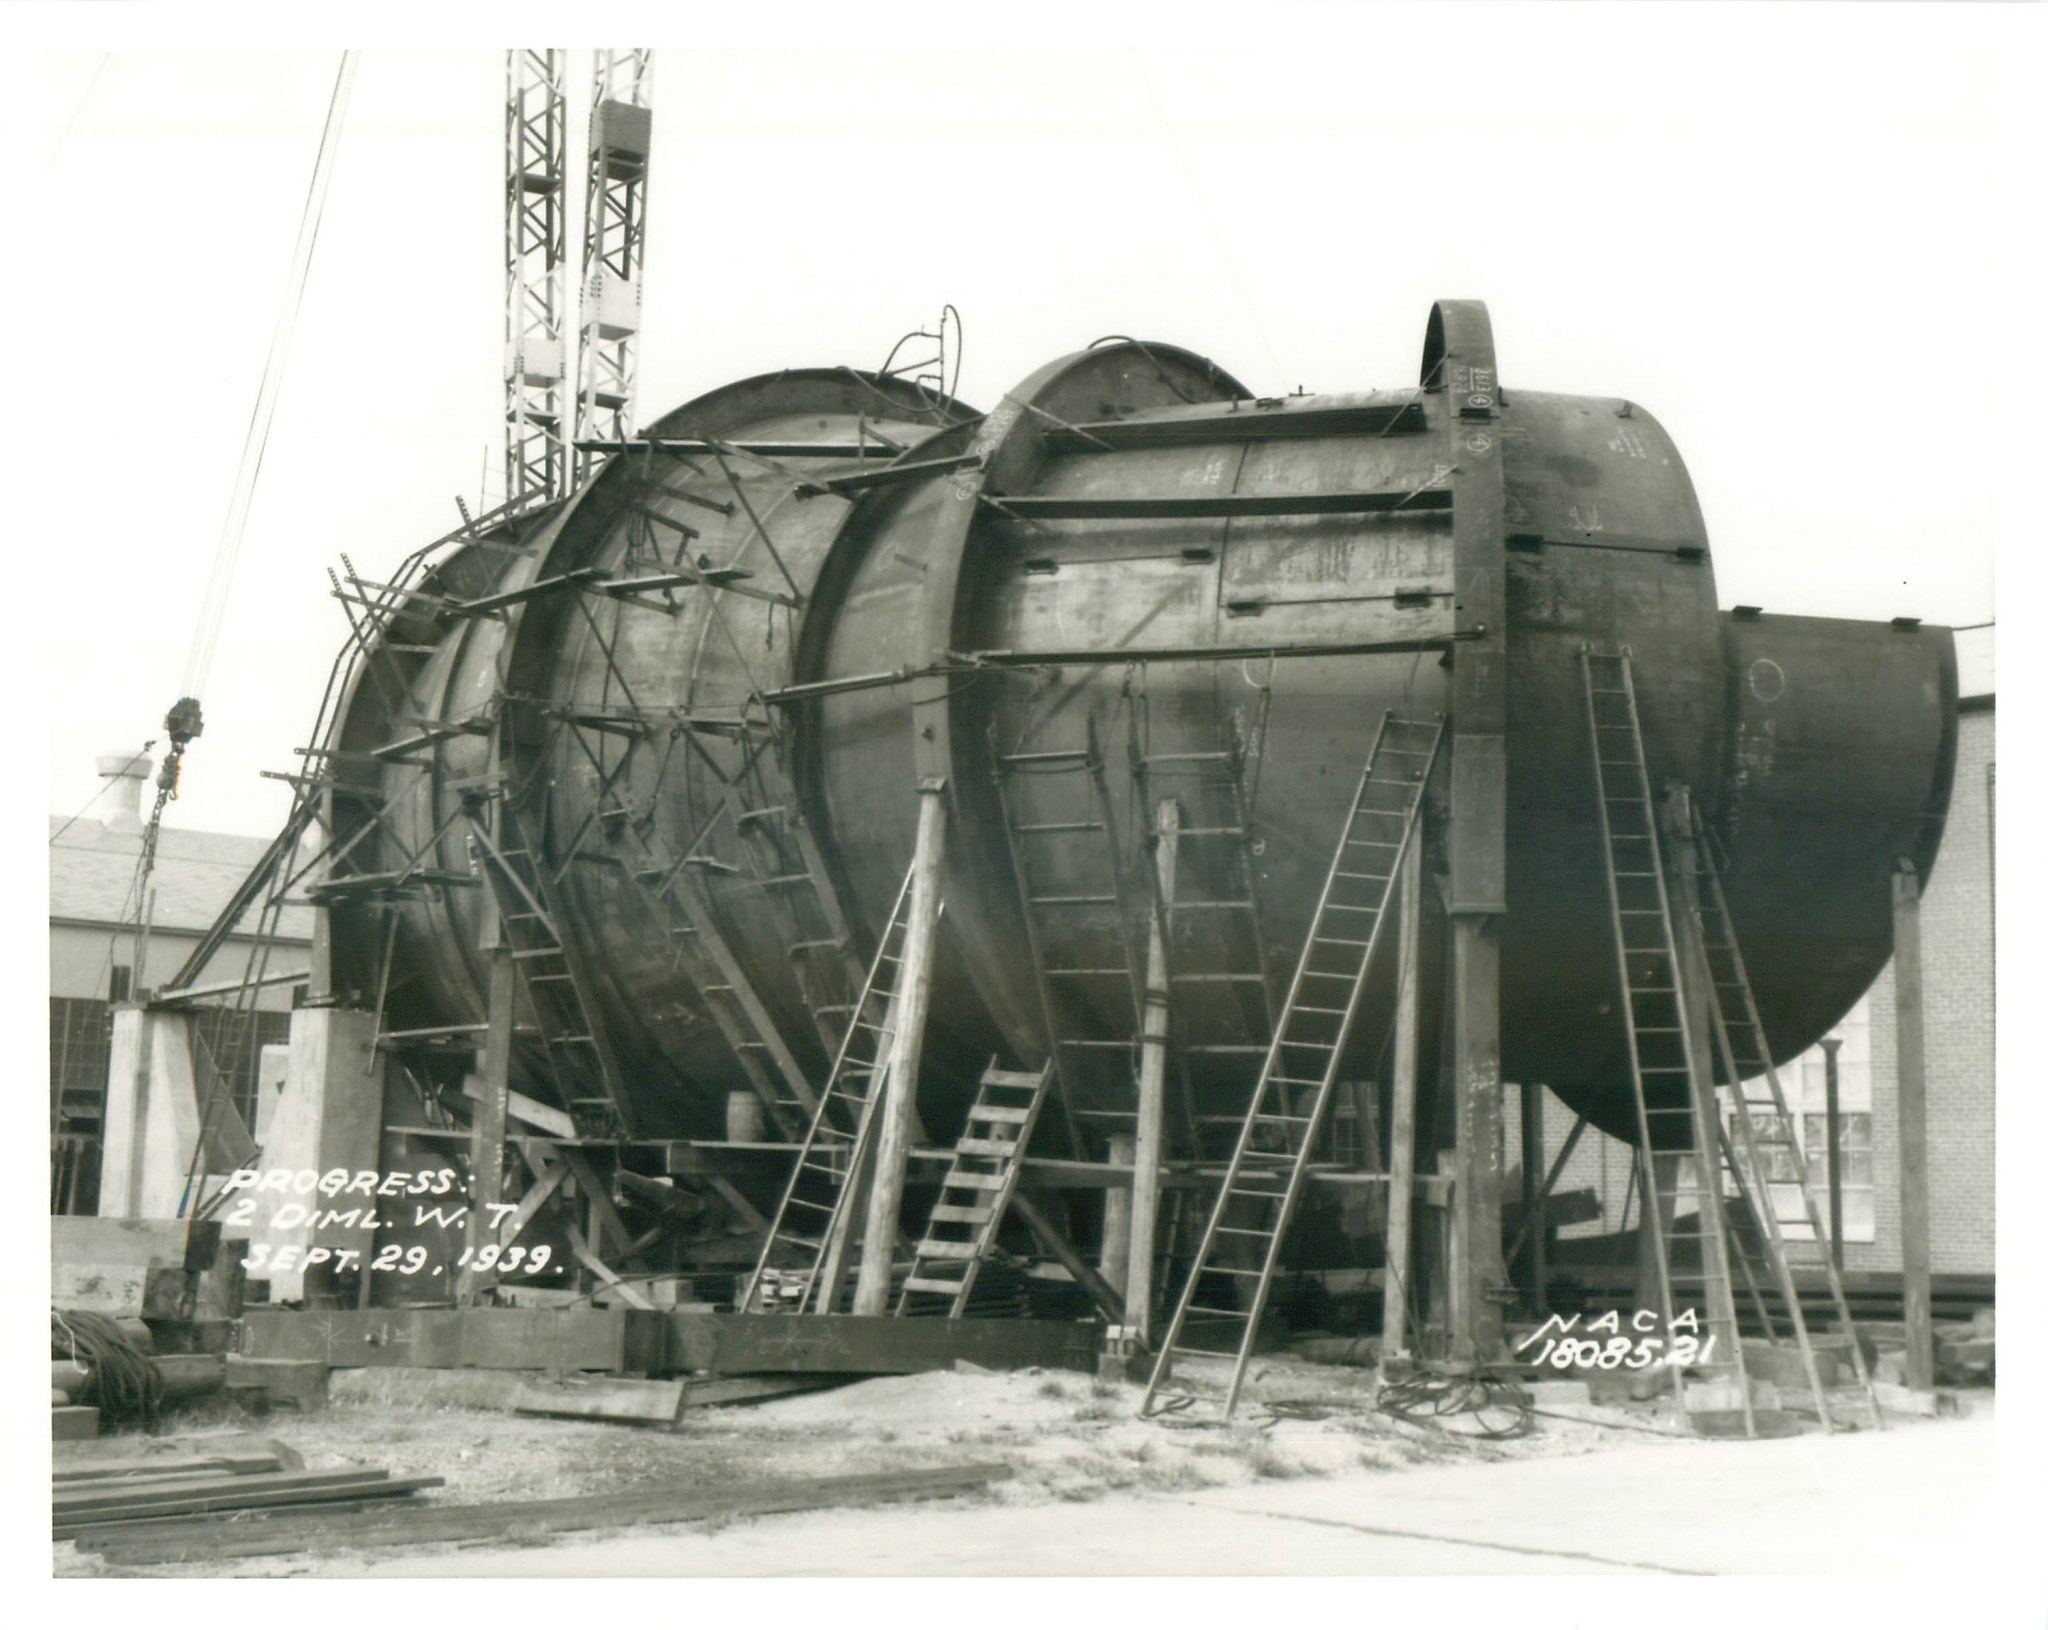 This is a photograph documenting the progress being made on the construction of the Low Turbulence Pressure Tunnel in 1939.